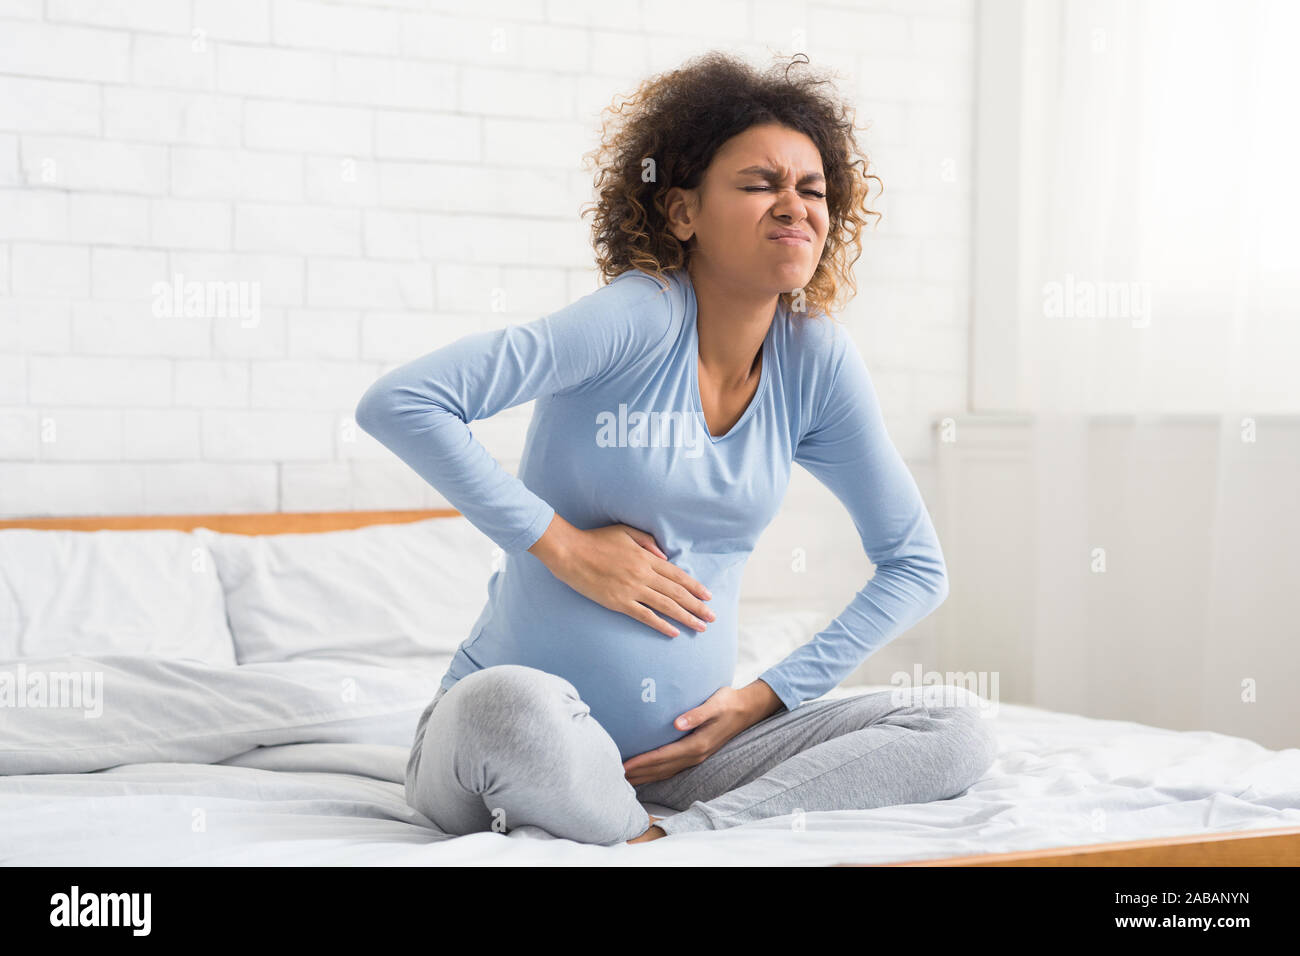 Labor contractions. Pregnant woman having pain in belly Stock Photo